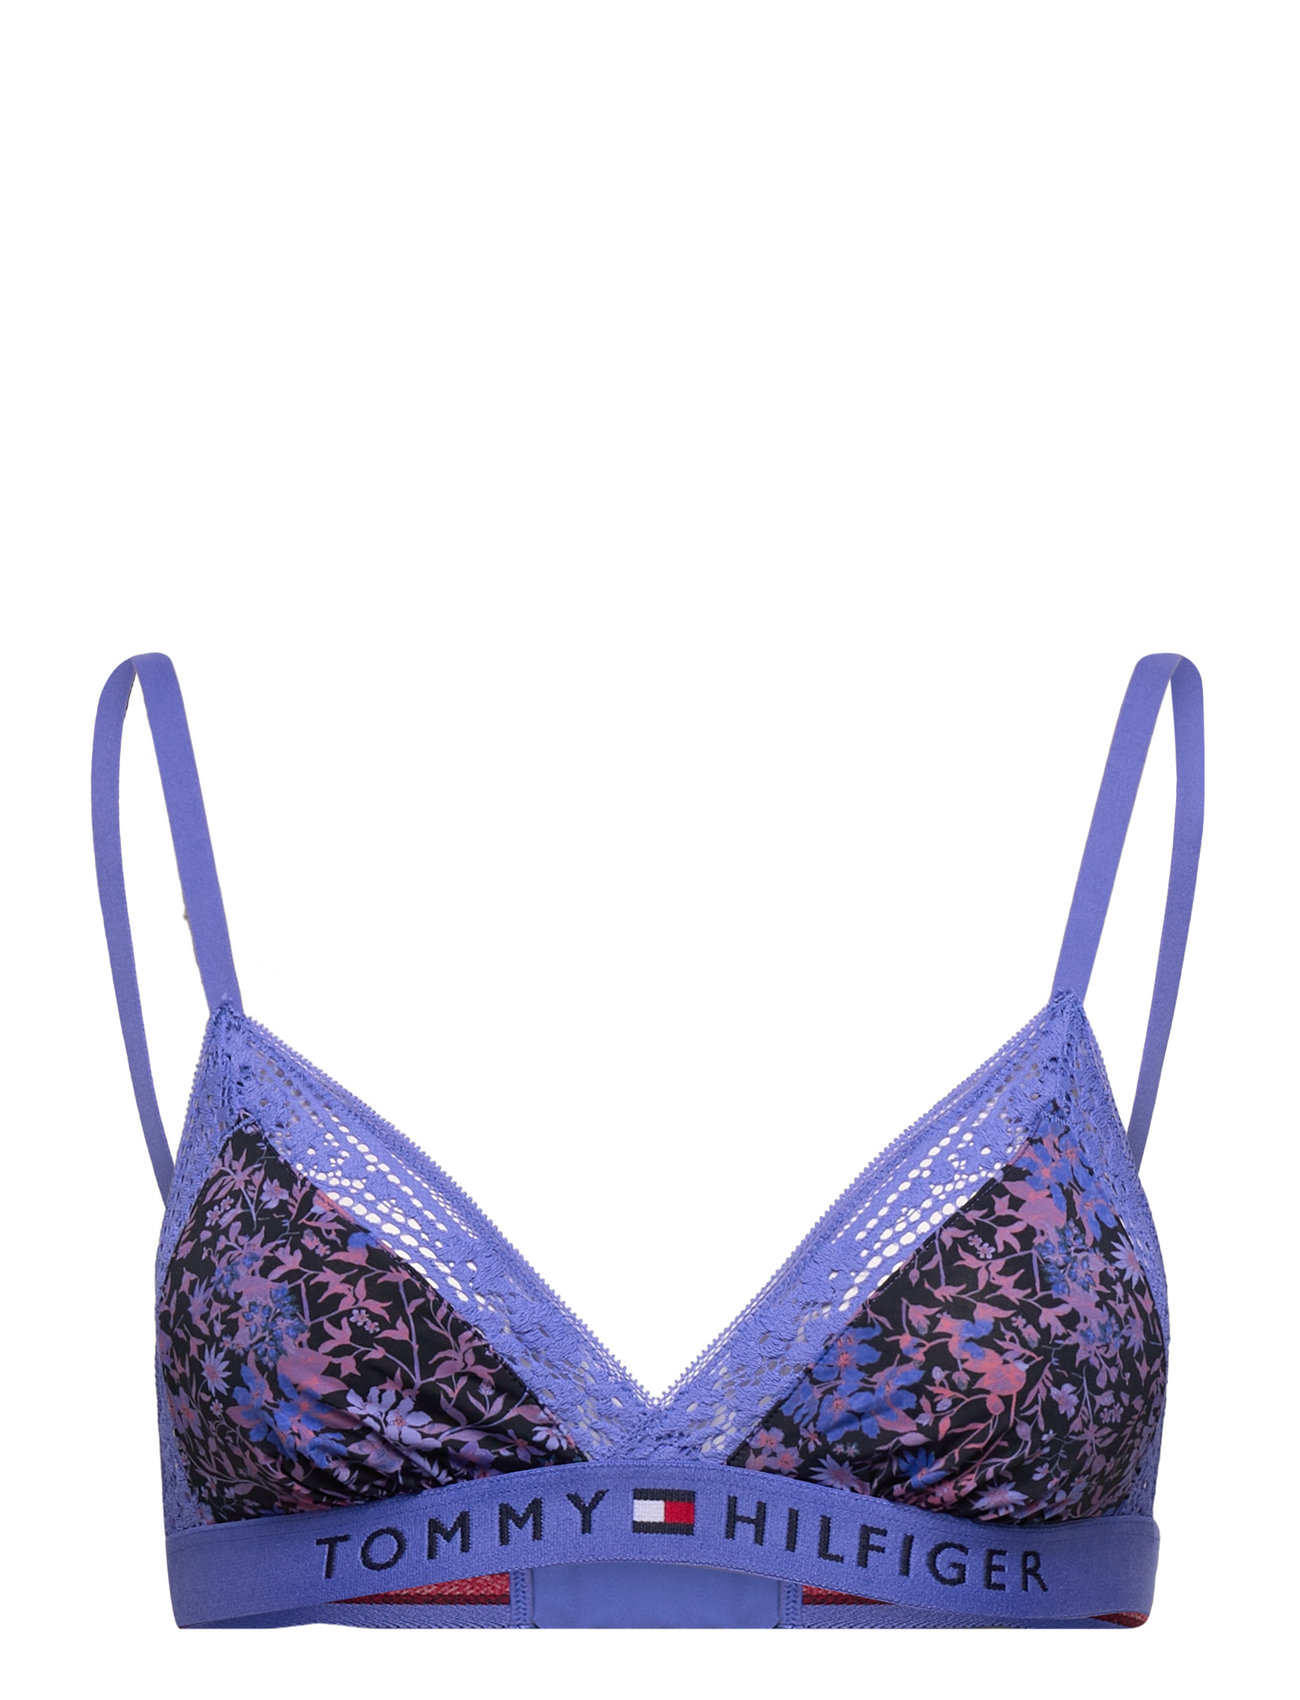 Tommy Hilfiger Unlined Lace Triangle Print - bralette 